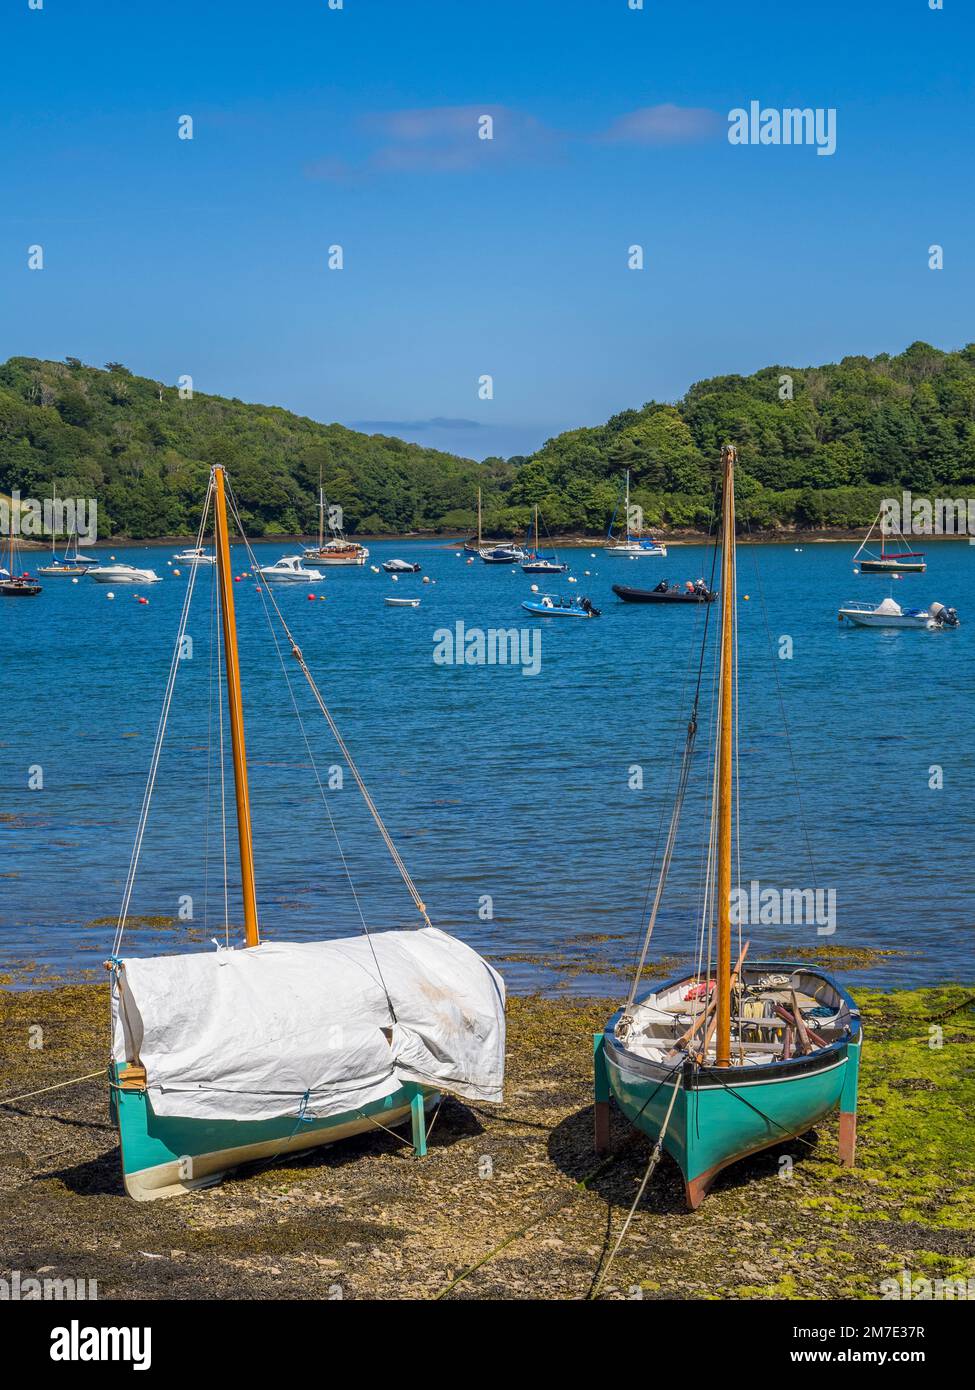 Boote am Ufer des Flusses Percuil, St. Mawes, Falmouth, Cornwall, England, UK, GB. Stockfoto